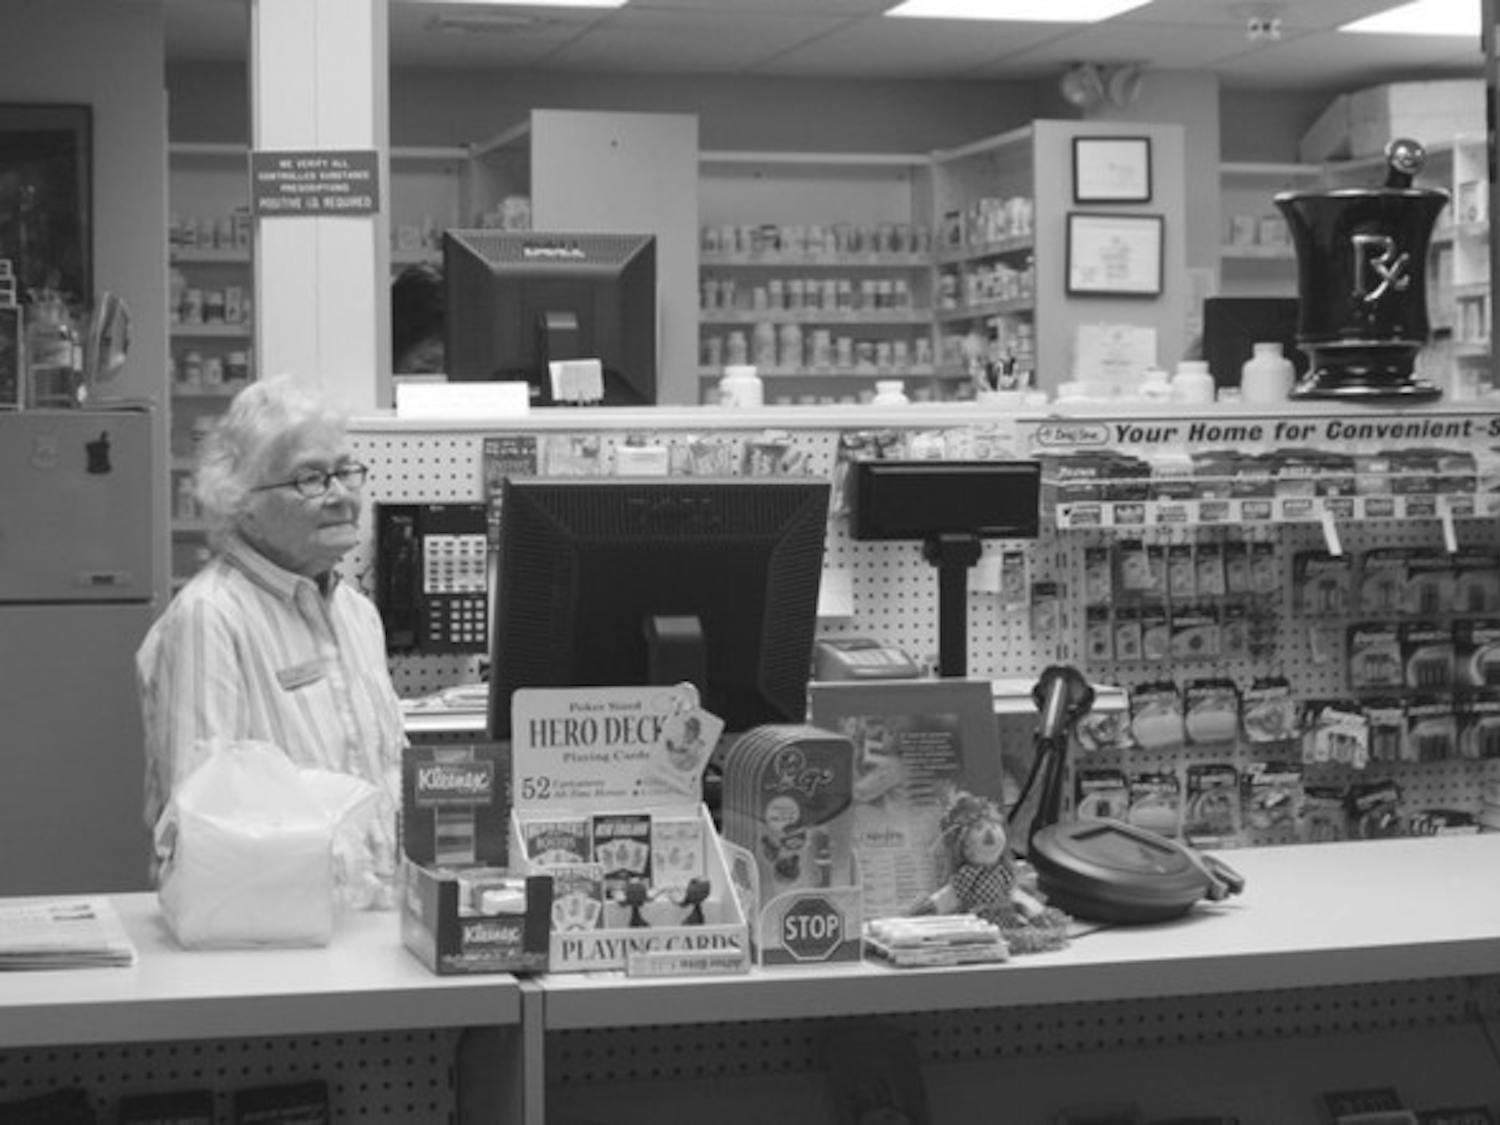 Pharmacist Melissa Knight works behind the counter at the Health Services pharmacy, where a prescription is still required for the Plan B pill.